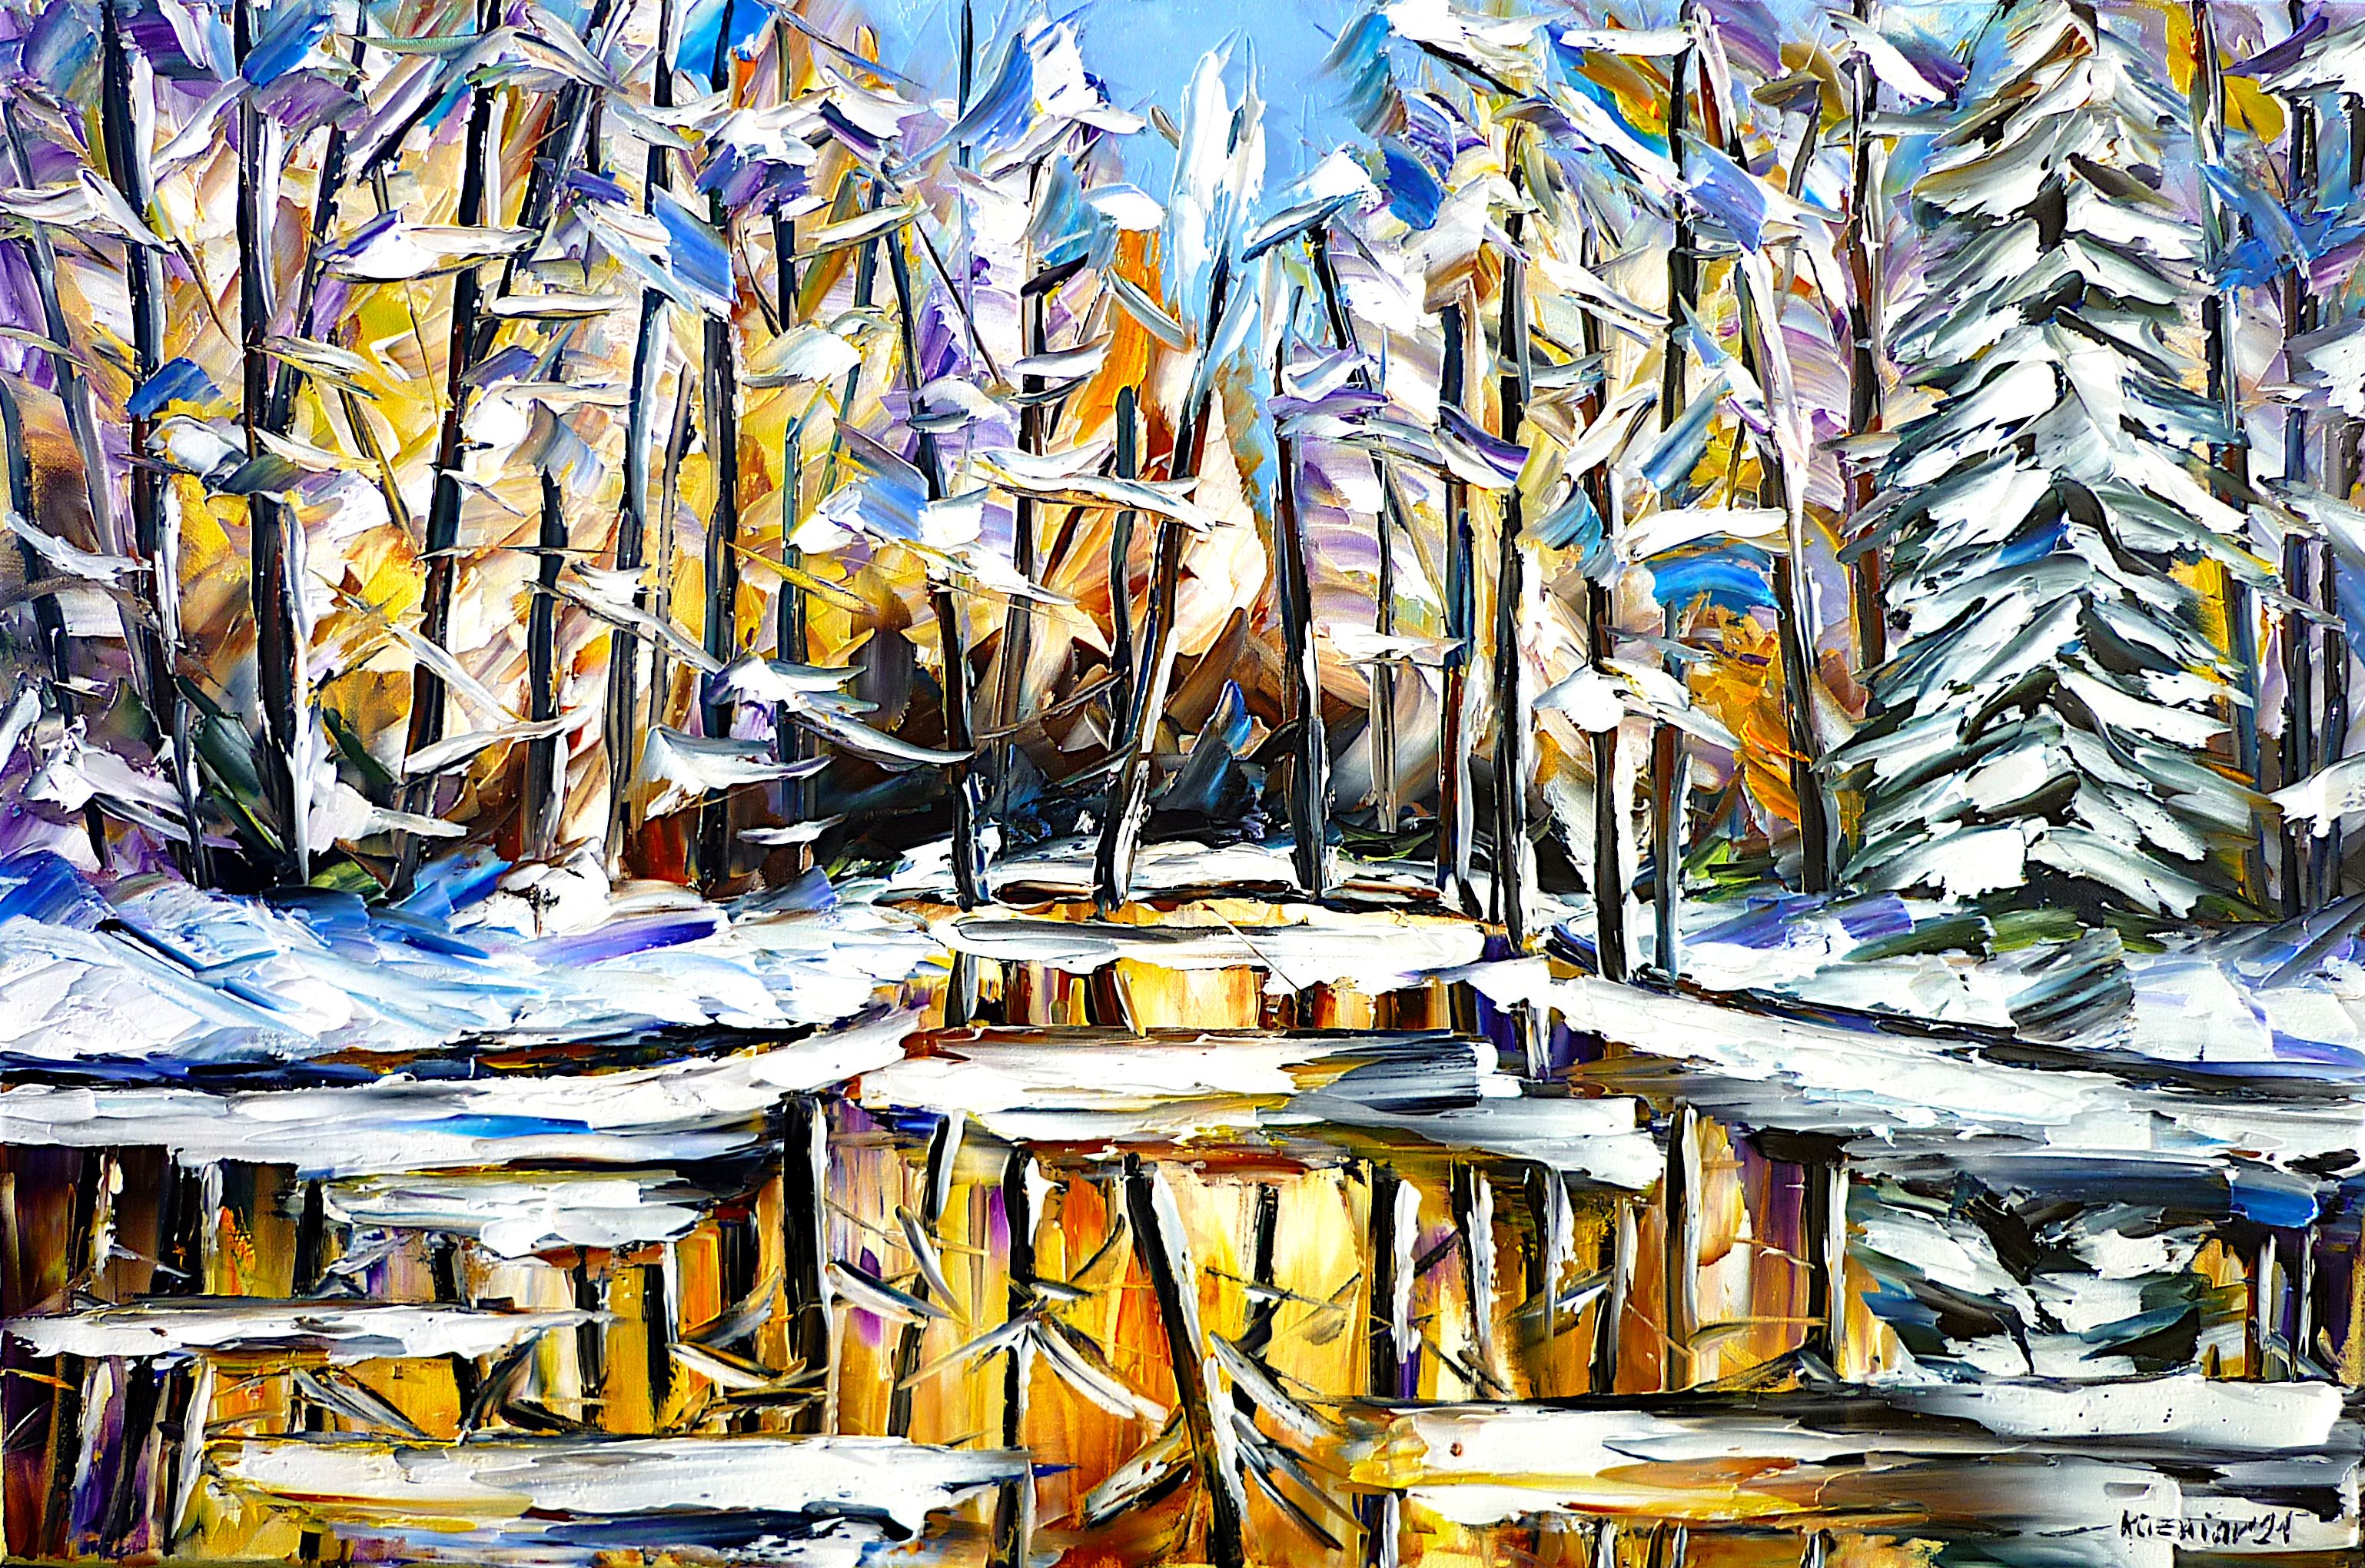 lakescape,lake in winter,winter sun,winter light,sunny winter day,sun in winter,sunlight,winter forest,forest in winter,snowy forest,forest trees,forest lake,forest landscape,lake in the forest,forest painting,water reflections,bright winter day,landscape picture,landscape painting,christmas mood,winter trees,white landscape,winter landscape,sunny winter day,winter and snow,snowy landscape,christmas feelings,winter beauty,winter sky,winter picture,winter painting,snowy trees,white winter,christmas time,winter love,white trees,palette knife oil painting,modern art,impressionism,abstract painting,lively colours,colorful painting,bright colors,light reflections,impasto painting,figurative